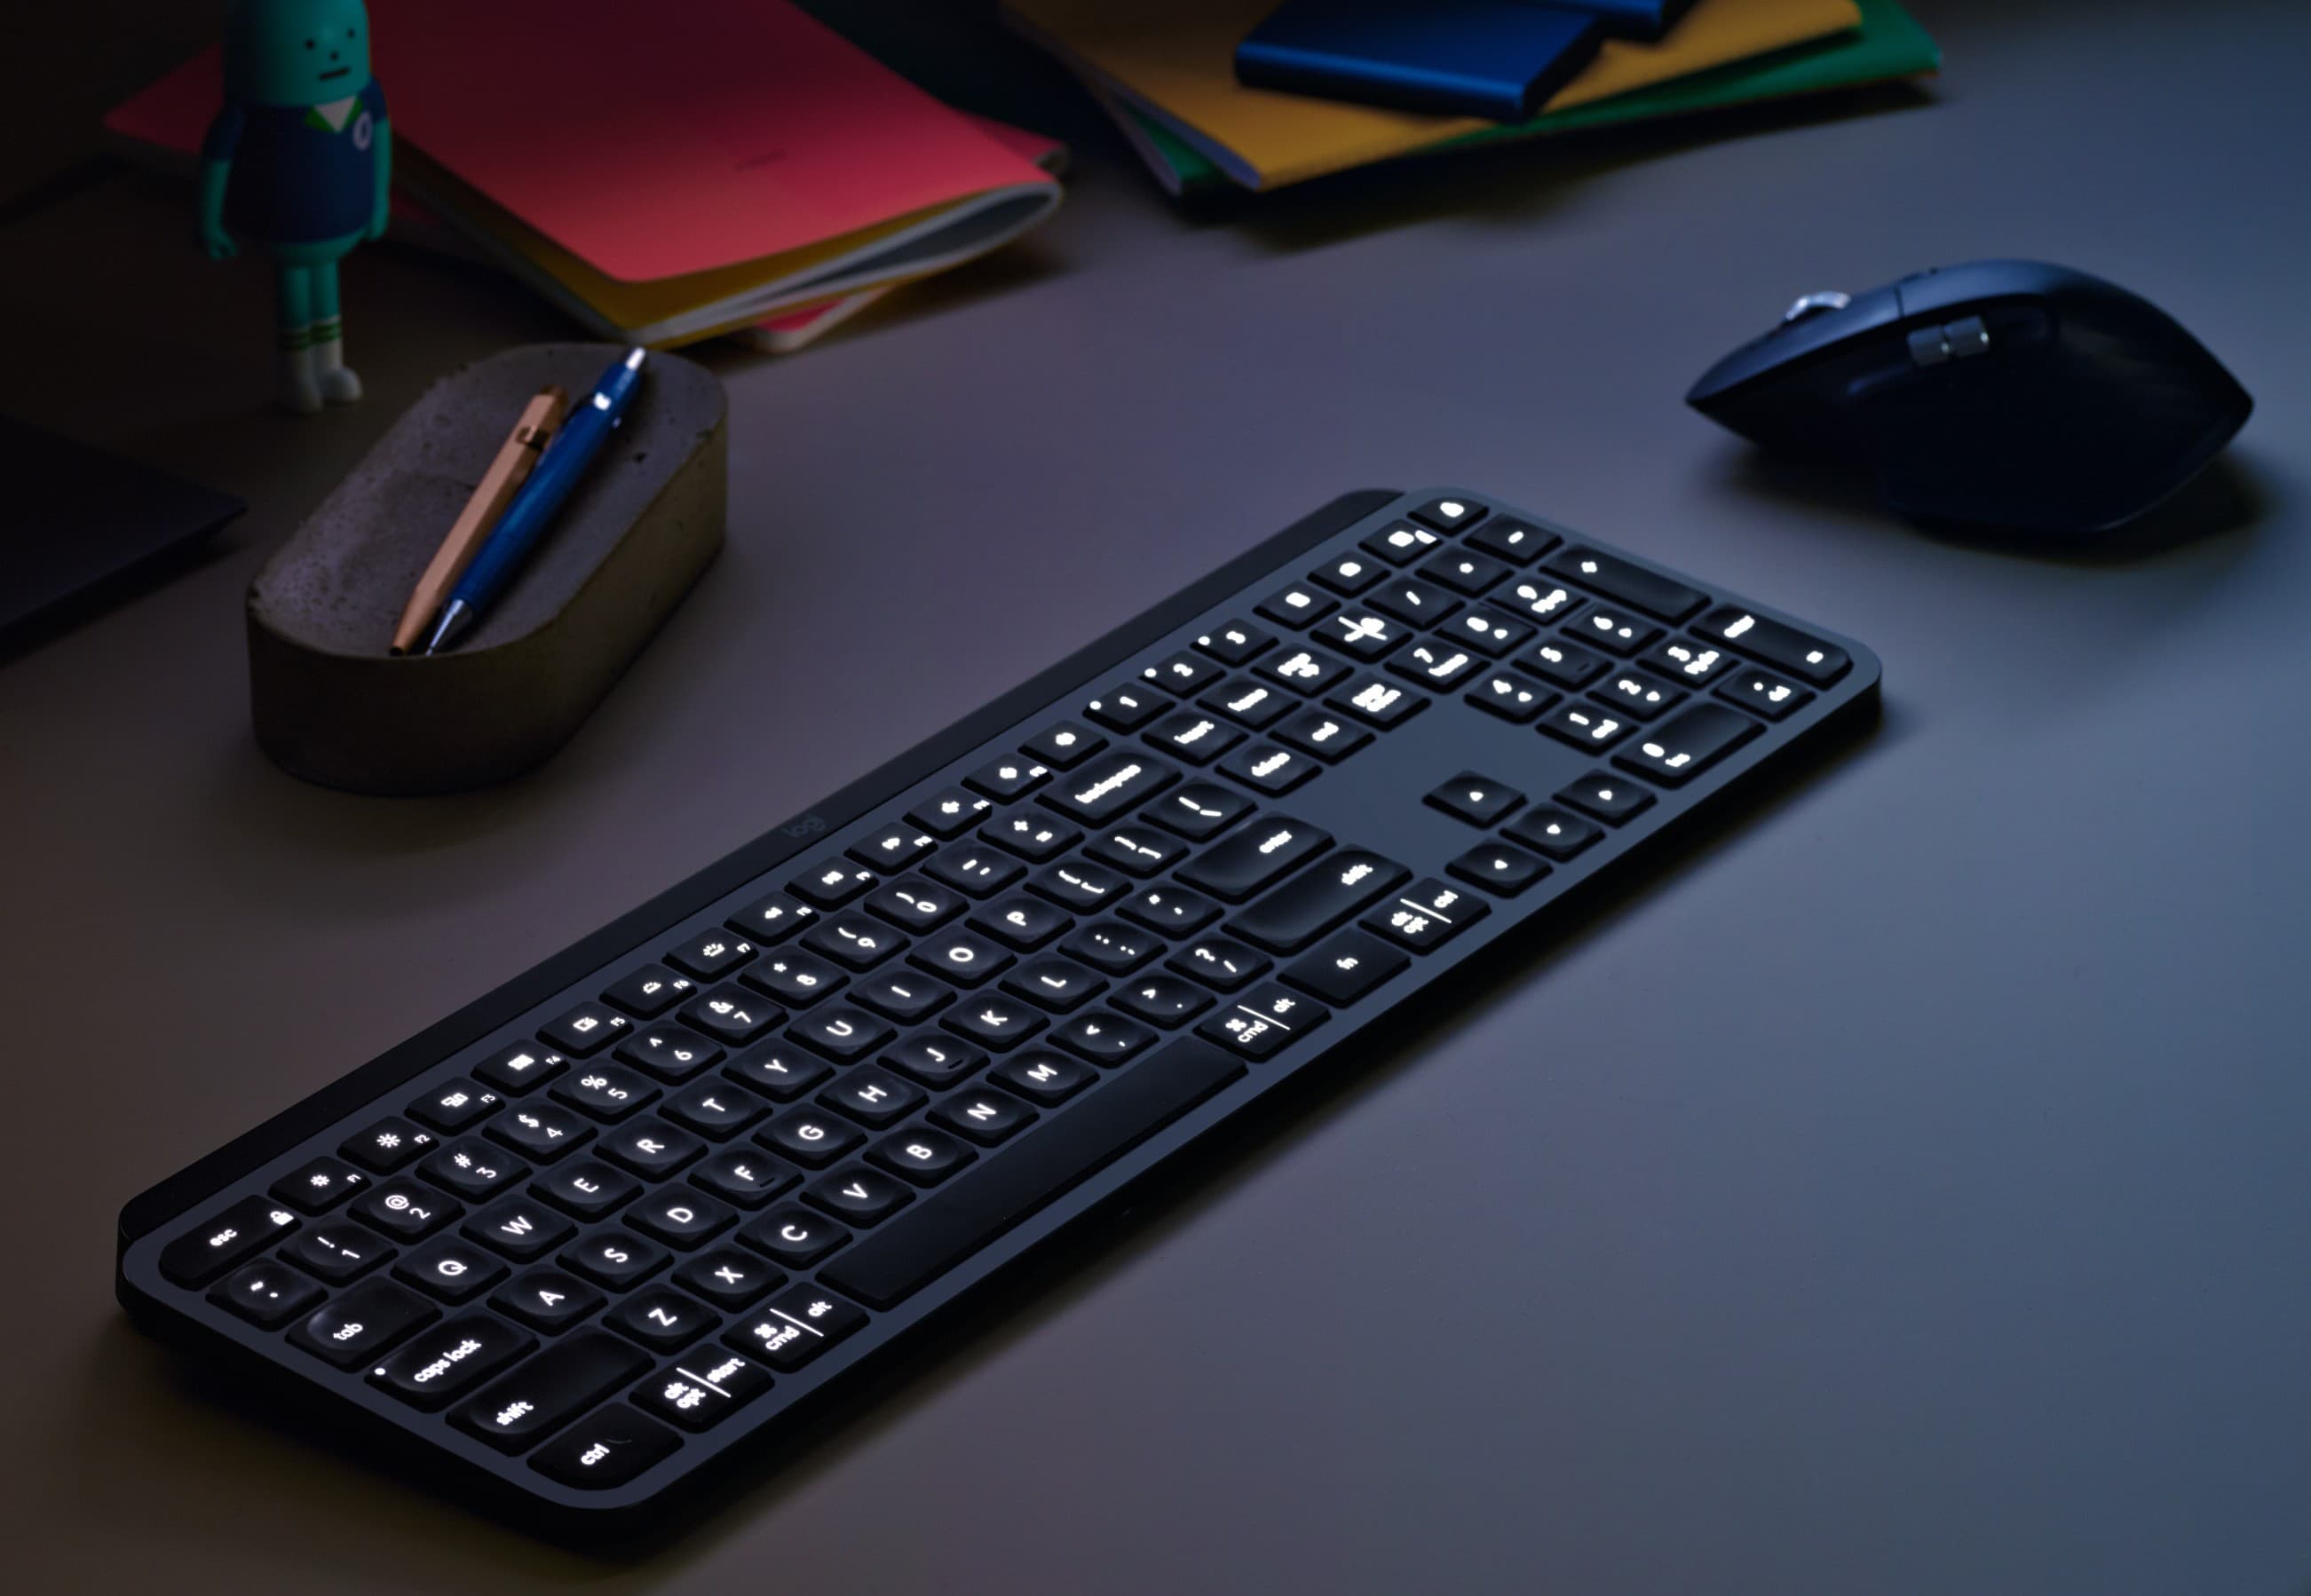 krone Kollegium forfængelighed With new MX Master 3 and MX Keys, Logitech doubles down on productivity |  Cult of Mac